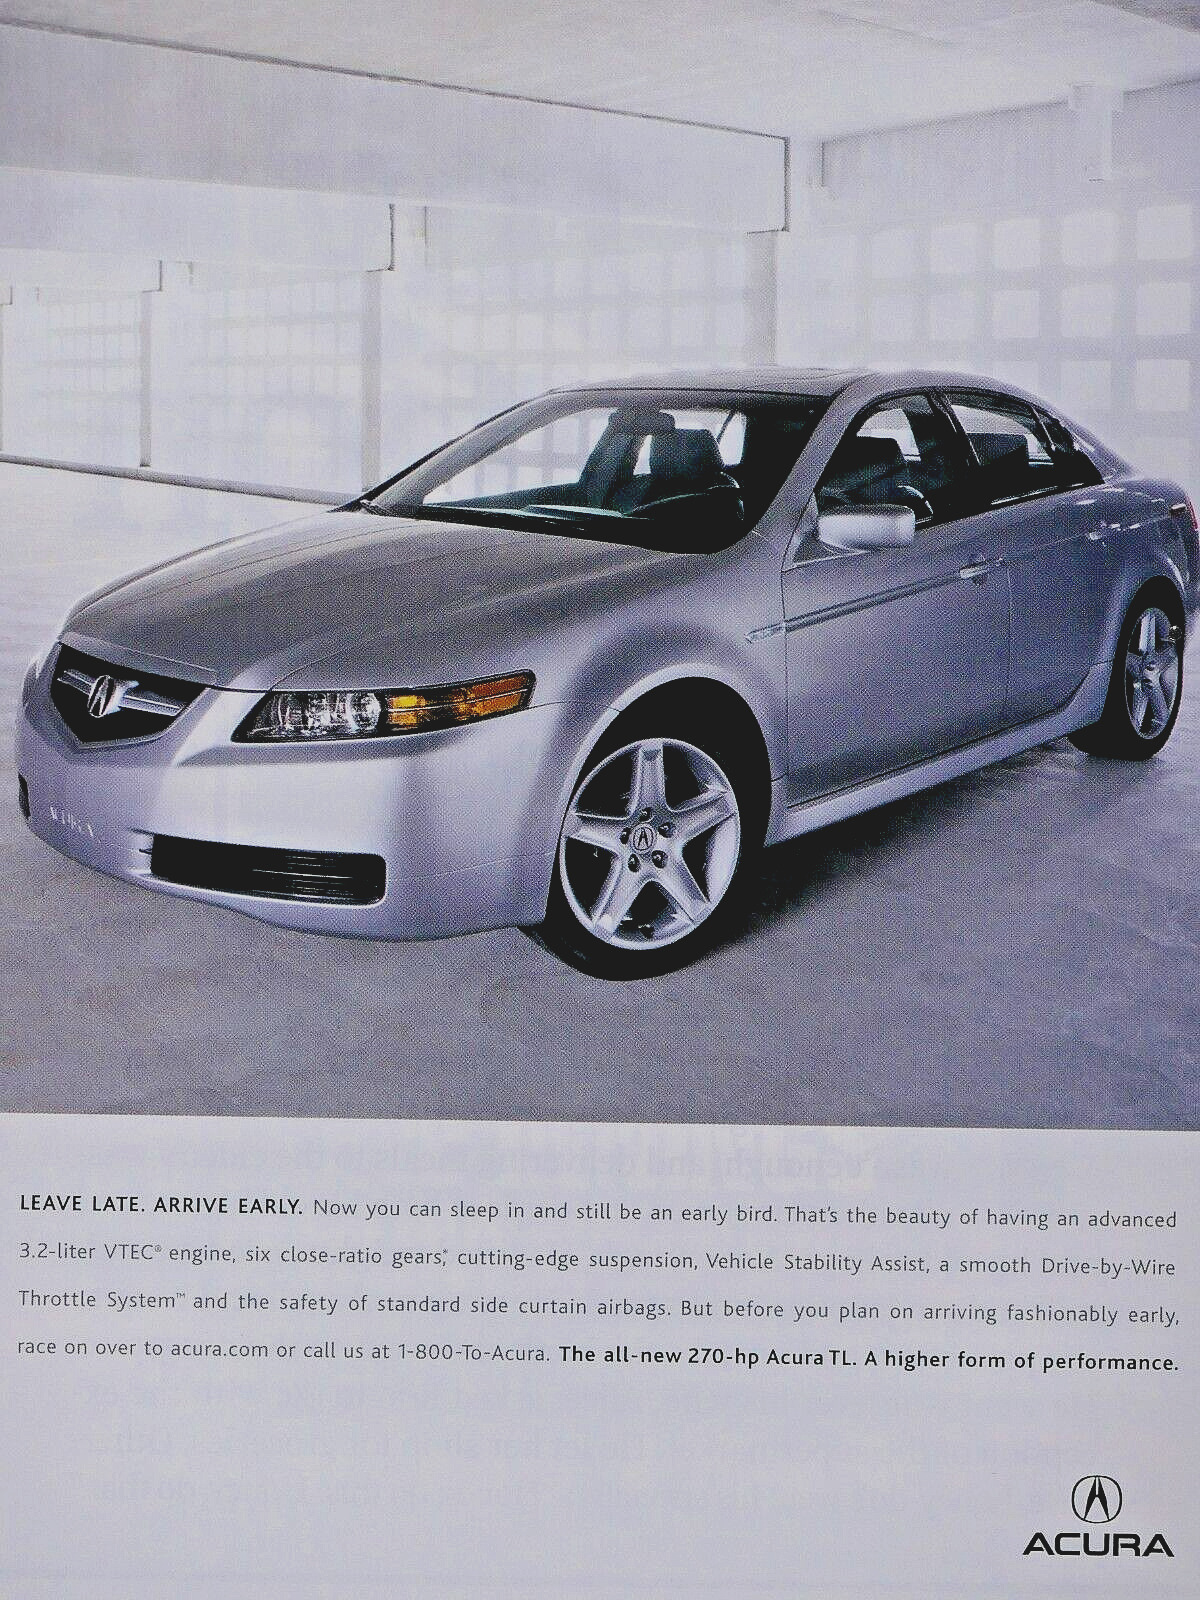 2003 Acura TL  Vintage A Higher Form Of Performance Original Print Ad 8.5 x 11